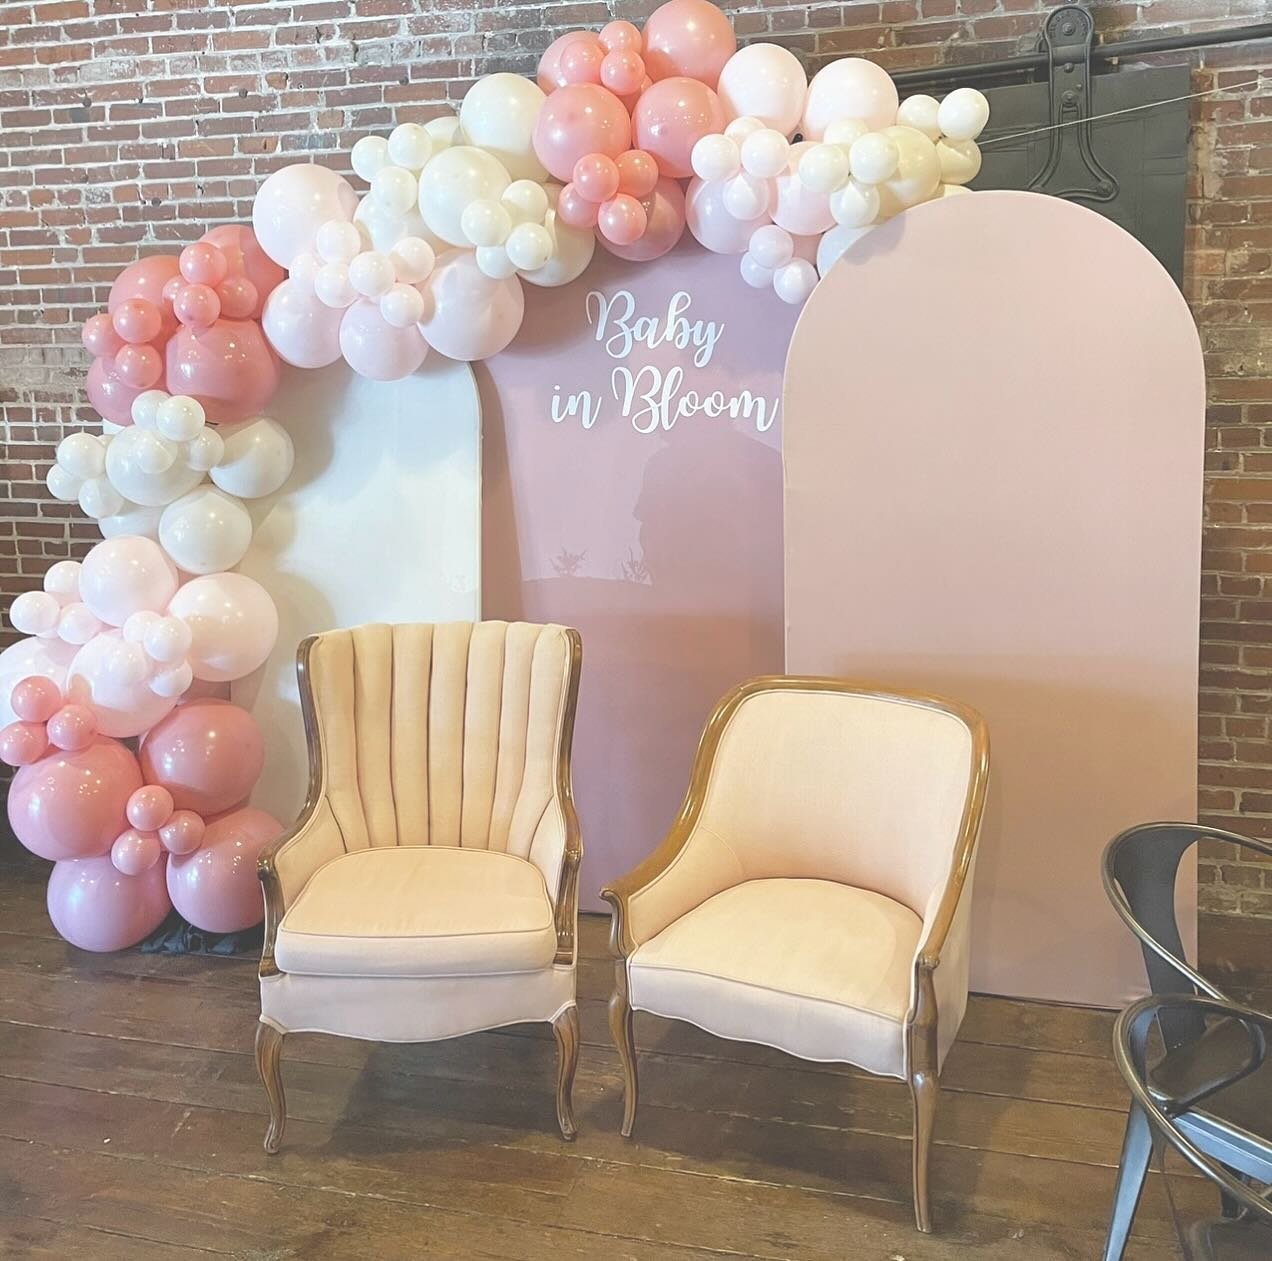 Baby in Bloom🌸🌷
&bull;
#stlballoons #balloongarland #stlparty #smallbusinessowner #stlsmallbusiness #womenownedbusiness #balloons #babyinbloom